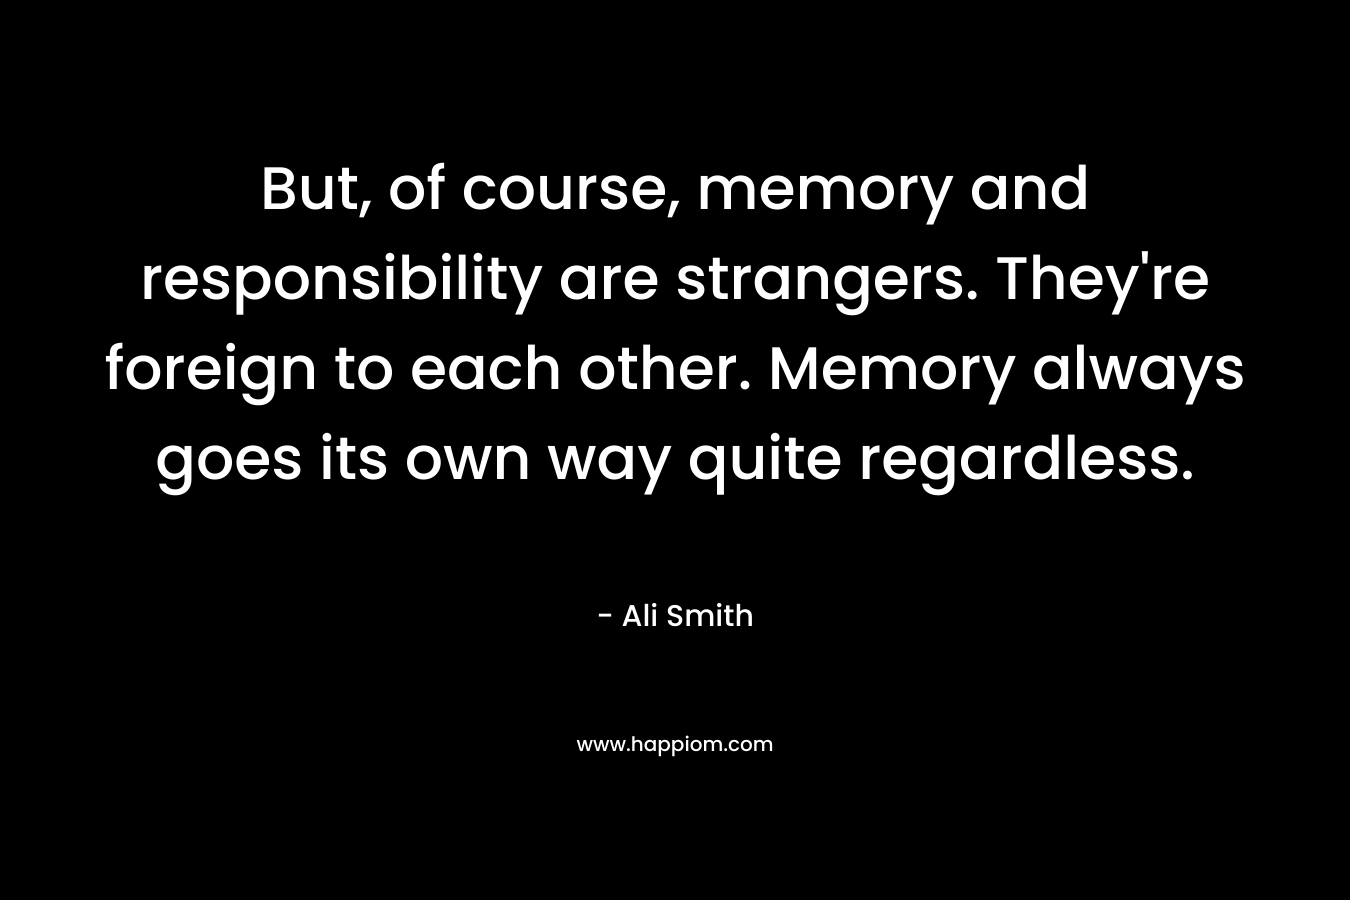 But, of course, memory and responsibility are strangers. They're foreign to each other. Memory always goes its own way quite regardless.